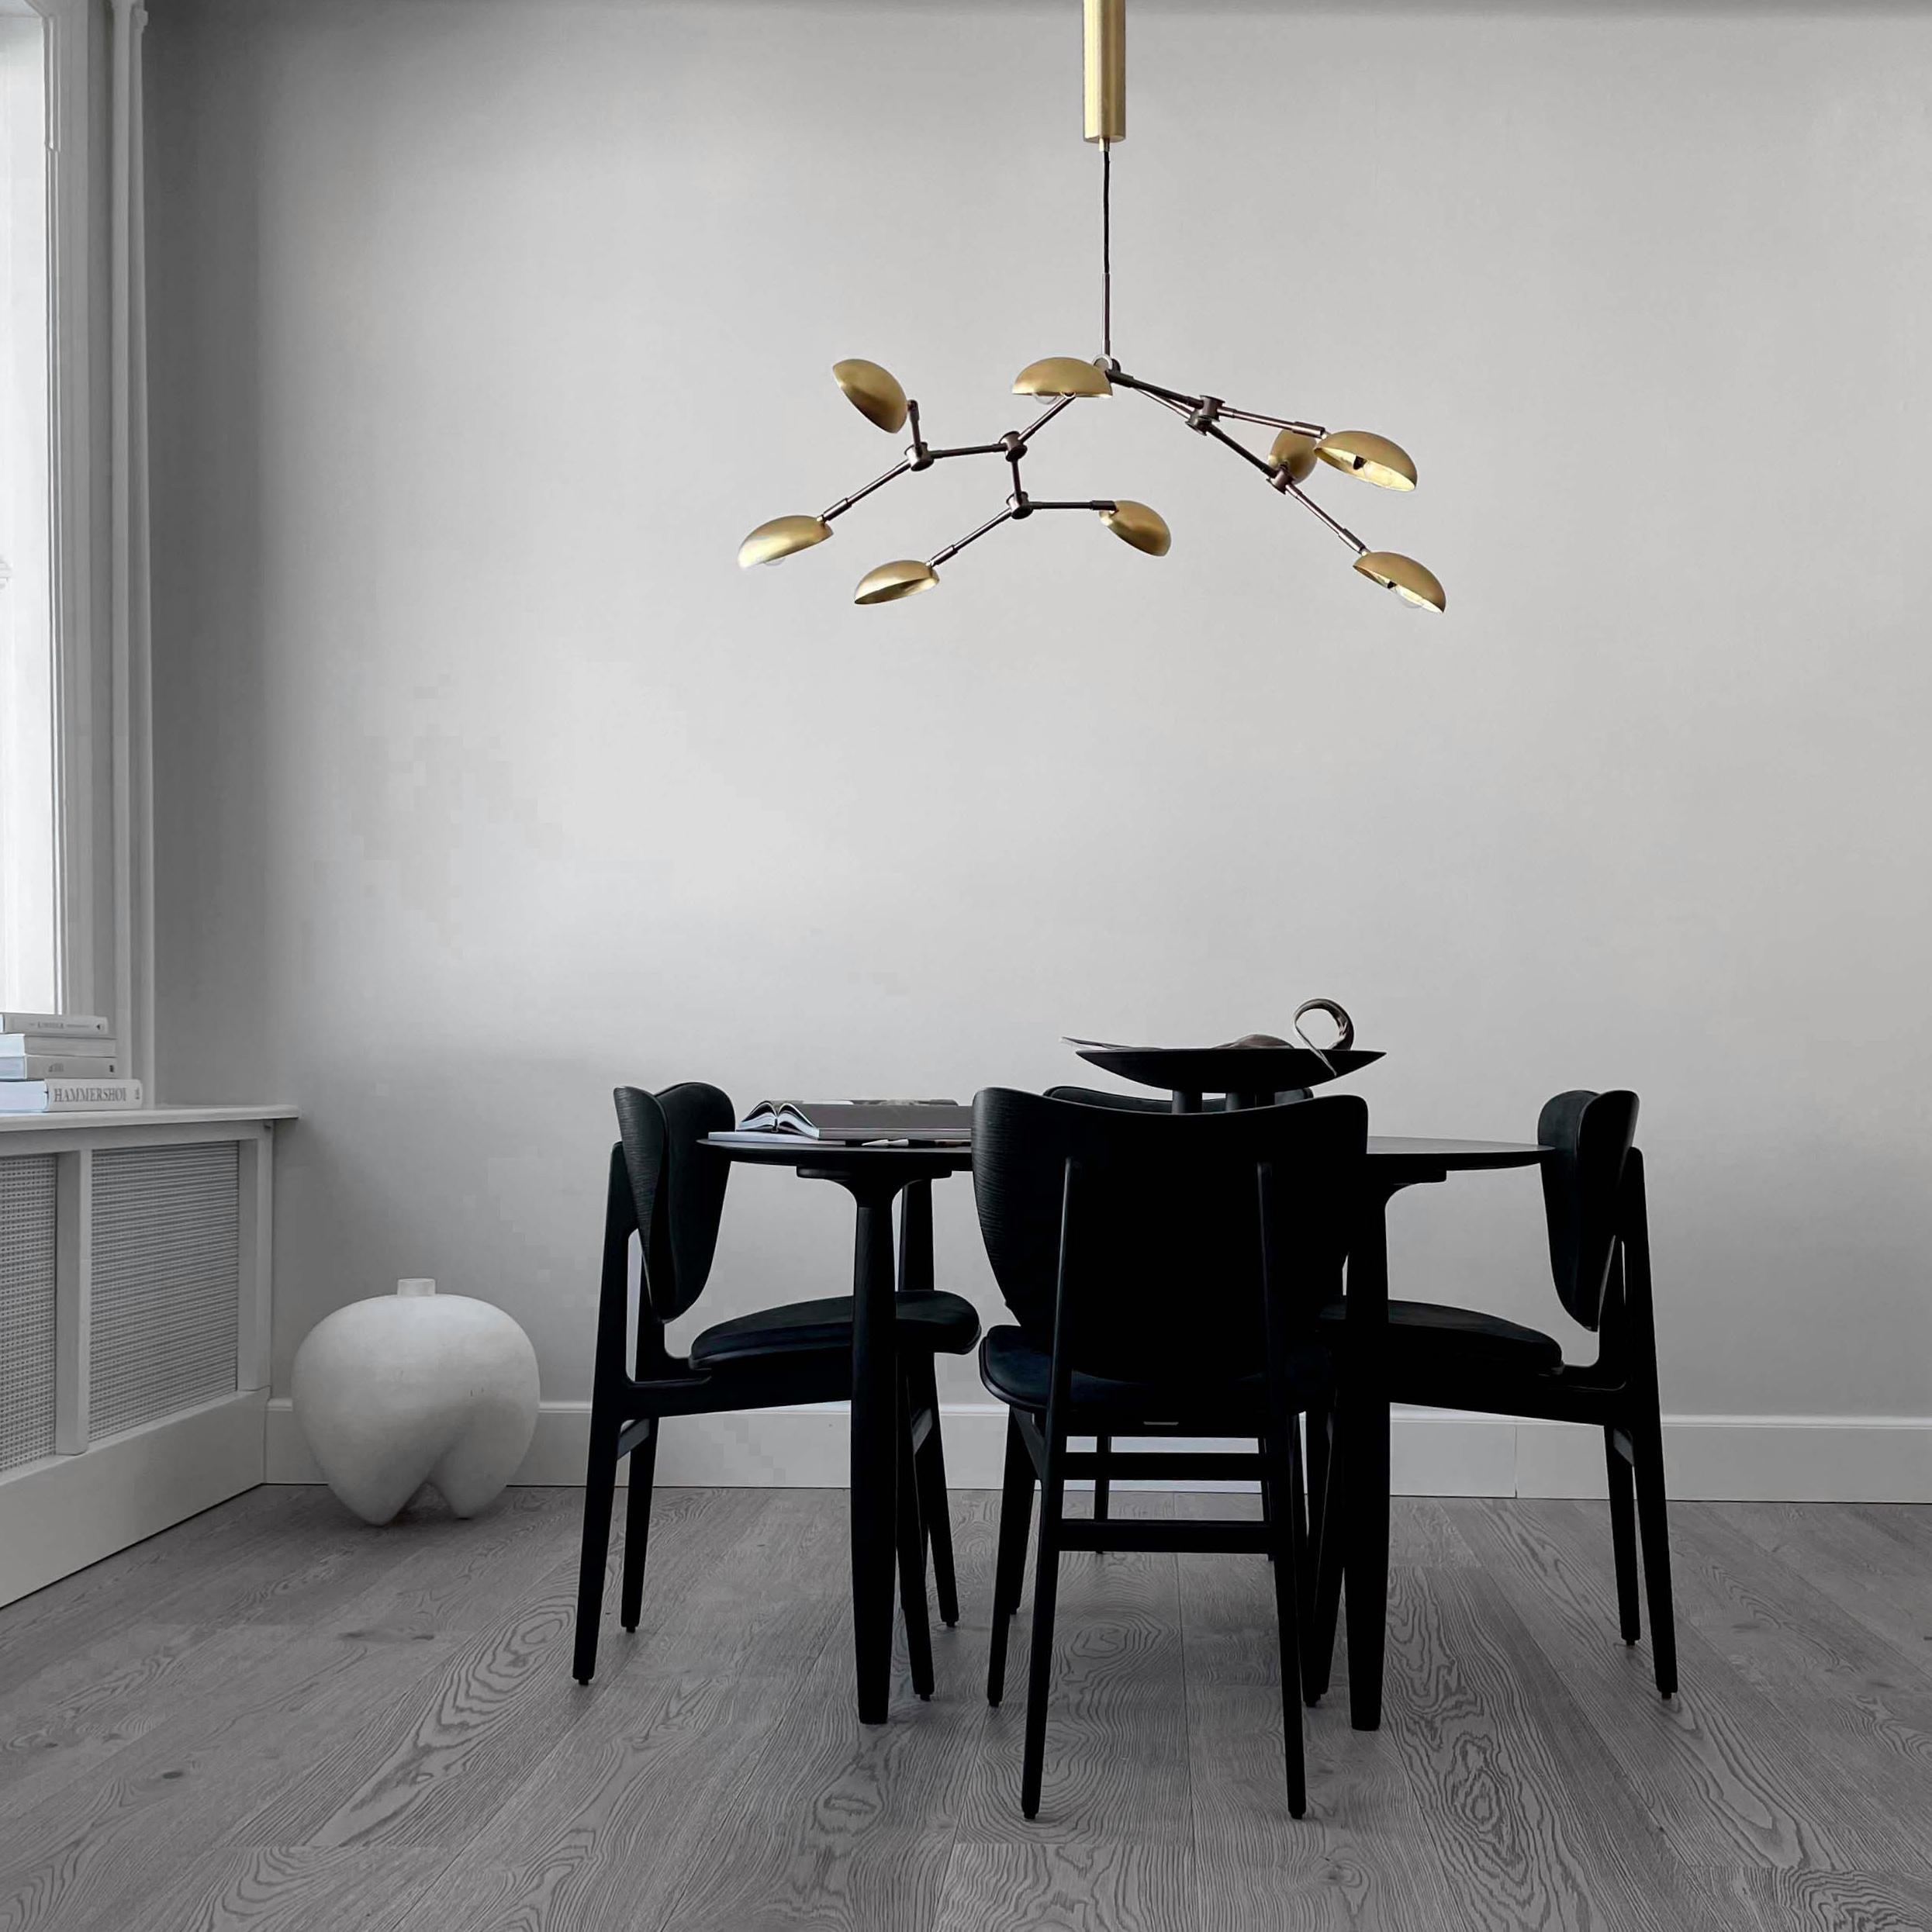 Drop chandelier plated metal by 101 Copenhagen
Designed by Kristian Sofus Hansen & Tommy Hyldahl.
Dimensions: L 155 x W 91 x H 21 cm
Materials: burned black; lampshade & ceiling cup:100% iron, with plated burned black finish; Pipes & attachment